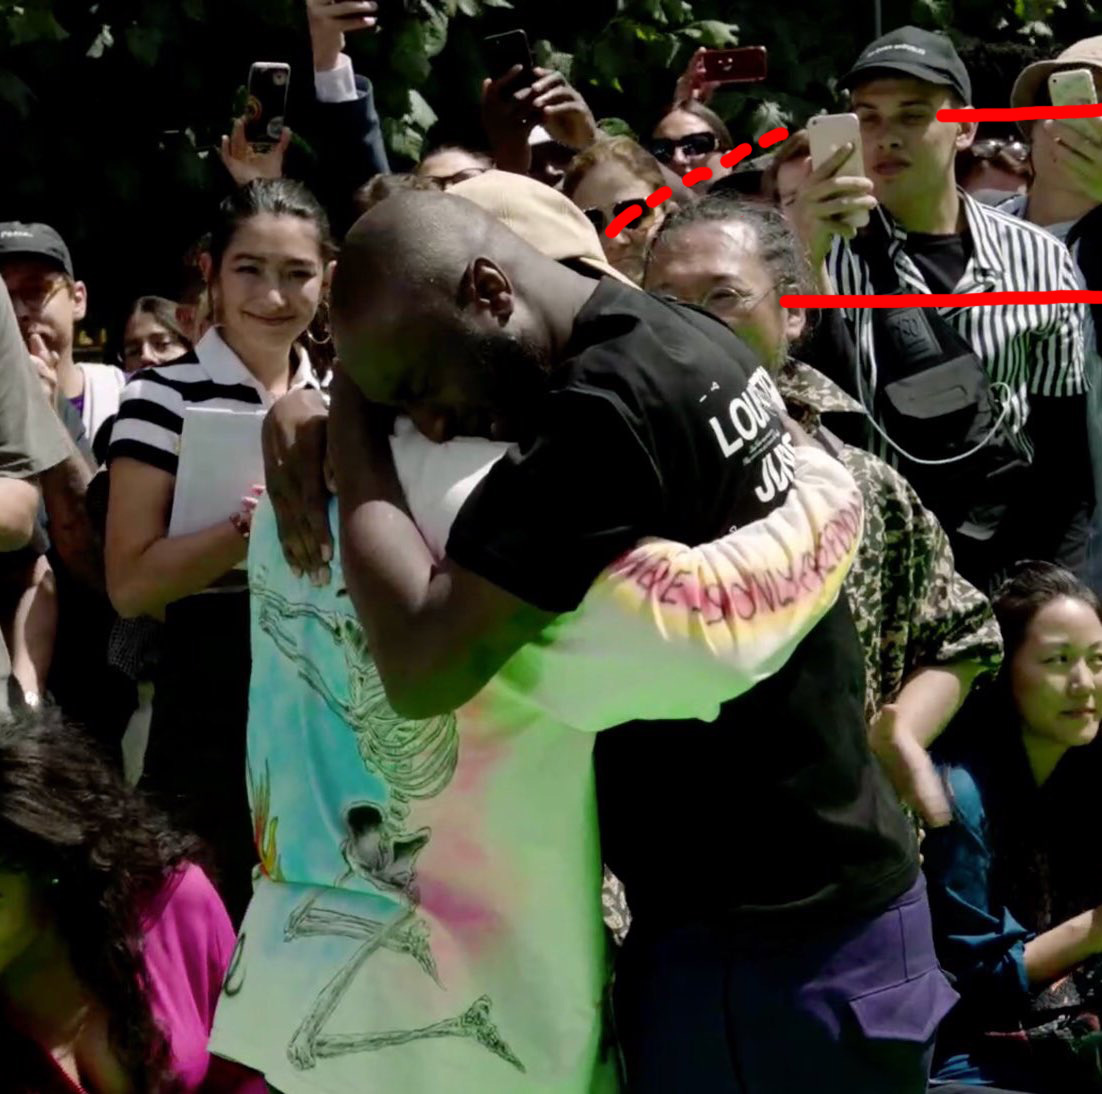 5 years ago today, Virgil Abloh fell into Ye's arms in tears for